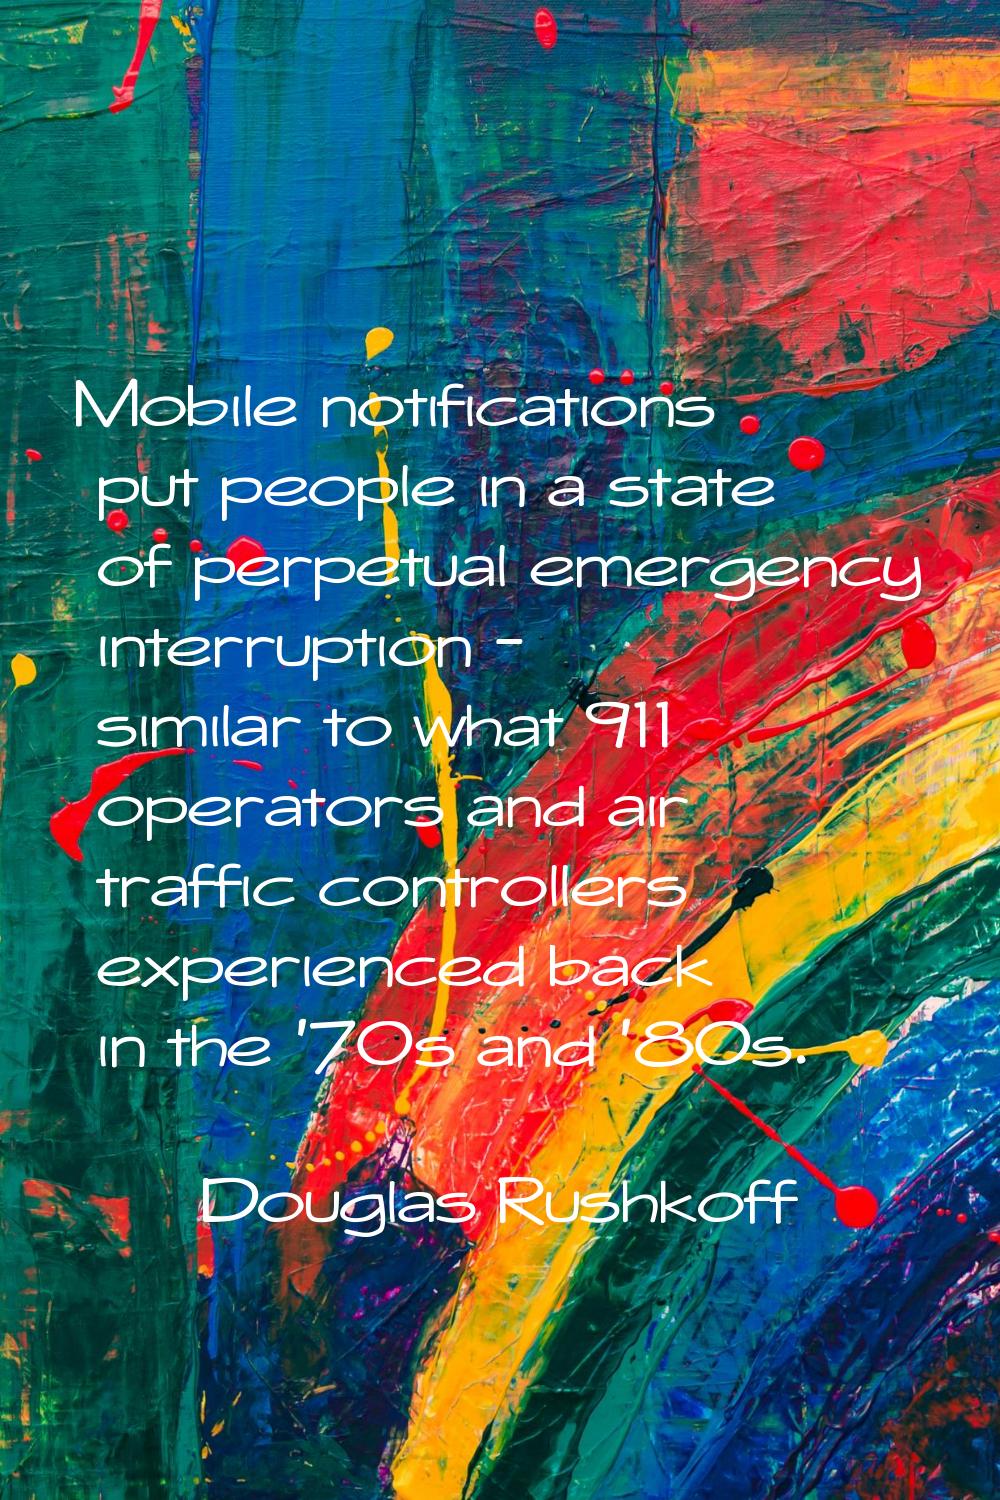 Mobile notifications put people in a state of perpetual emergency interruption - similar to what 91